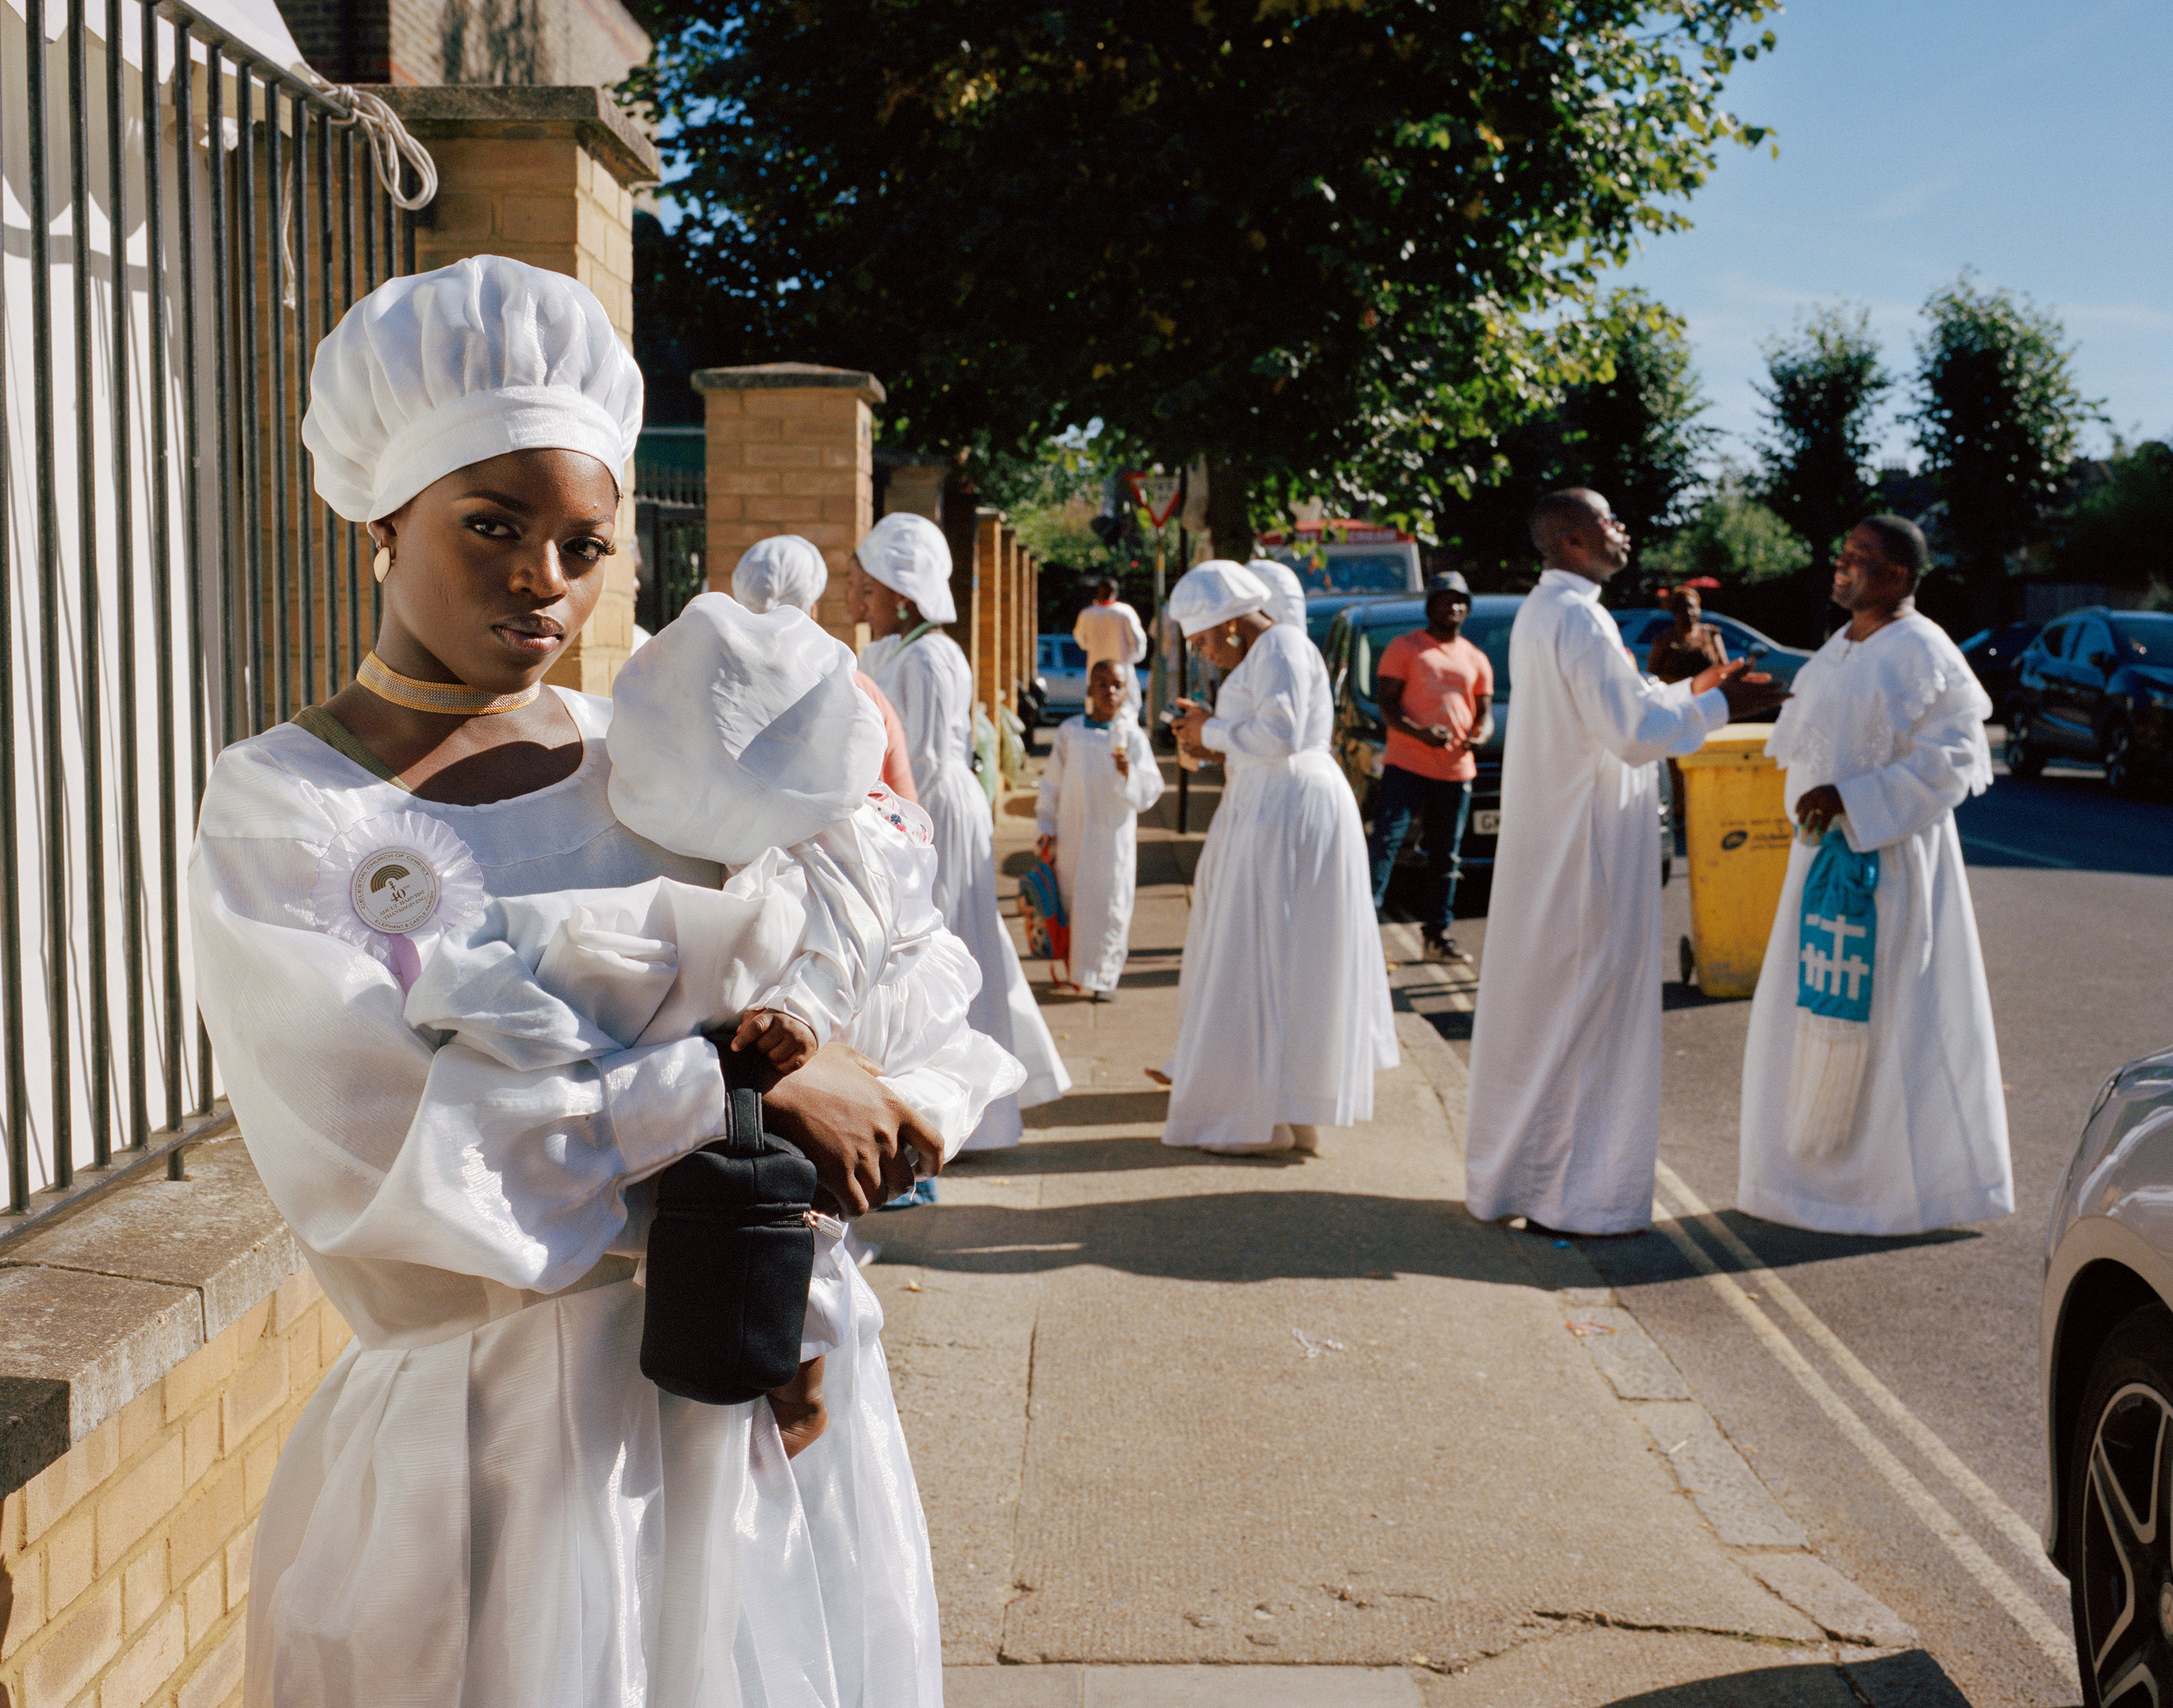 Hannah stands on the street holding her baby cousin whilst members of the Congregation greet each other and chat in the background of the street. (Sophie Green)